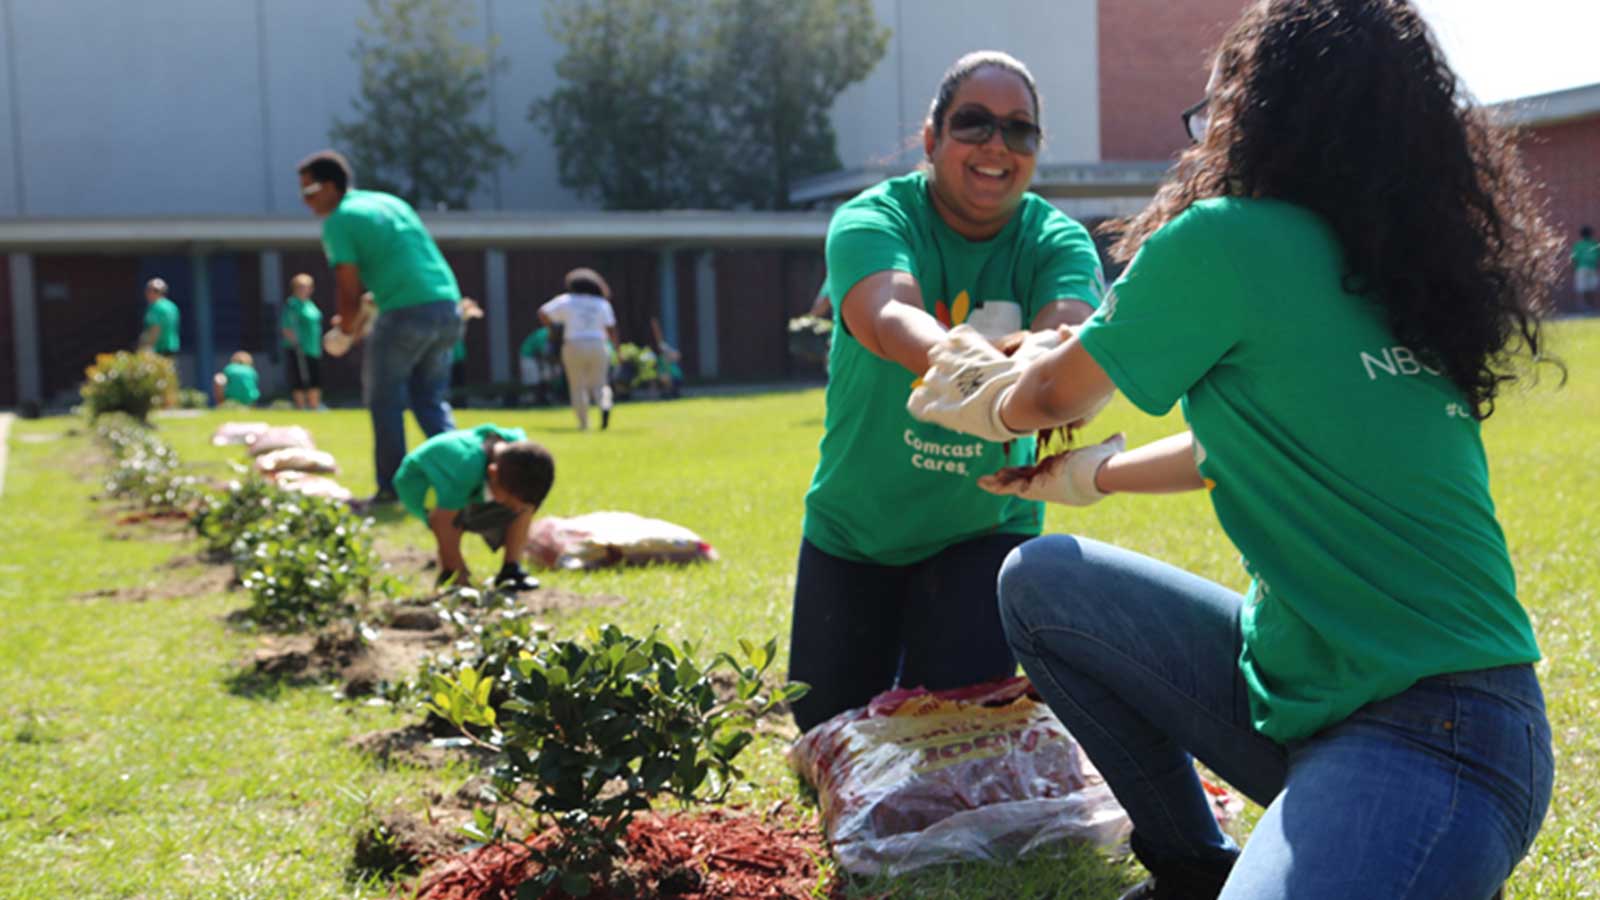 Visit Haven of Peace - Comcast Cares Day hero